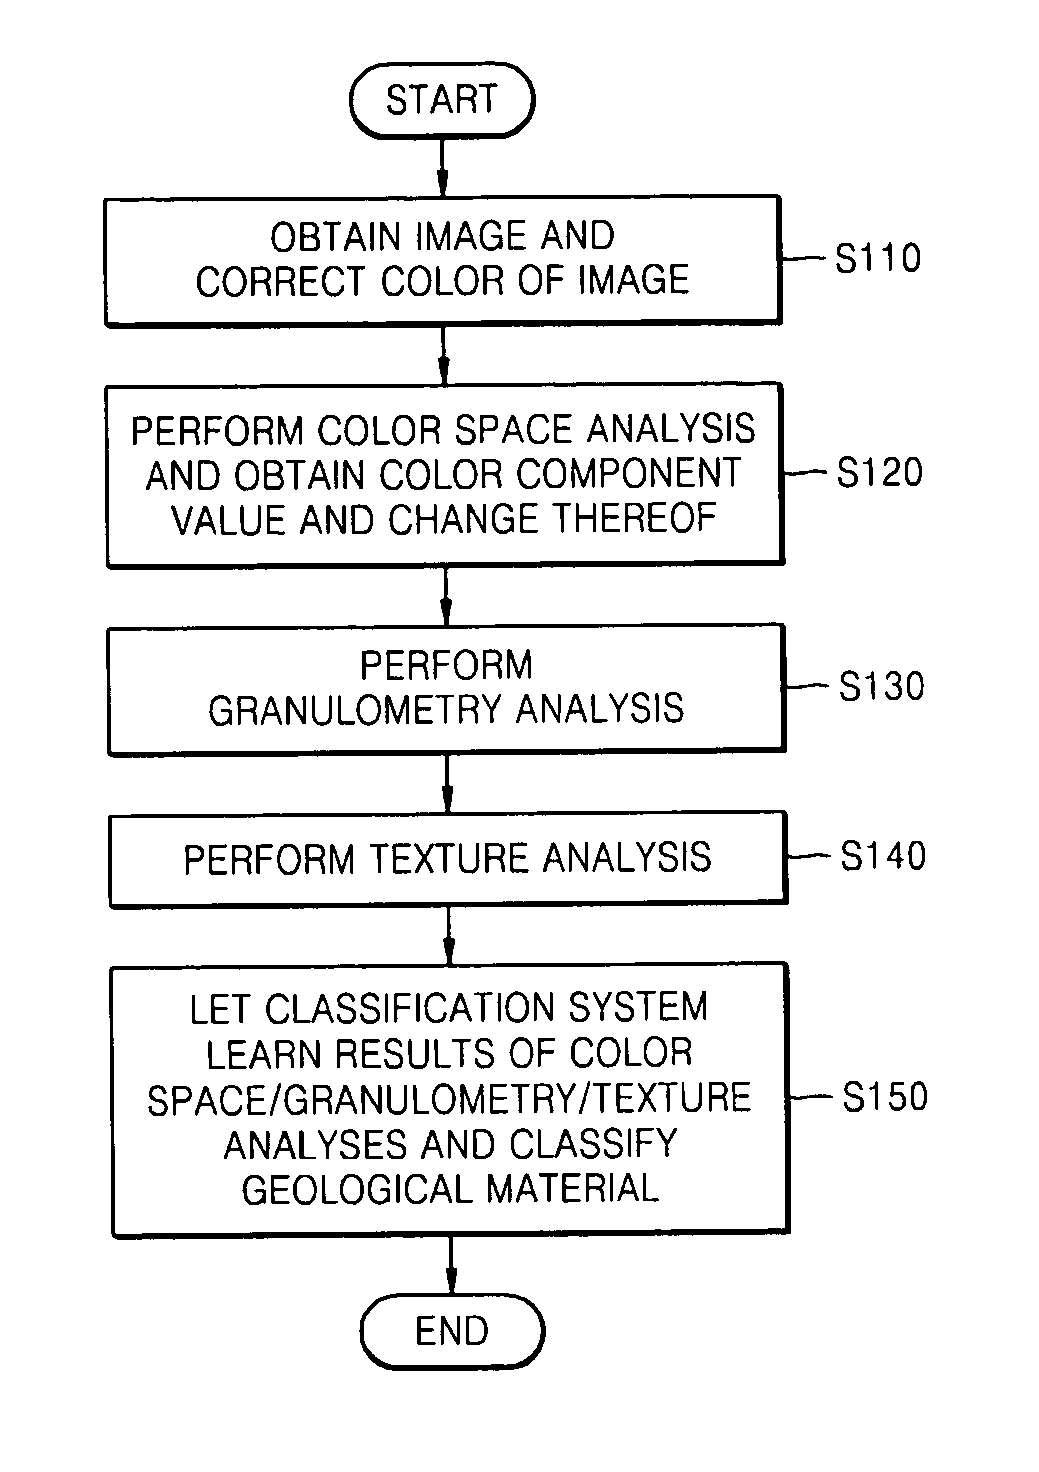 Method and apparatus for classifying geological materials using image processing techniques